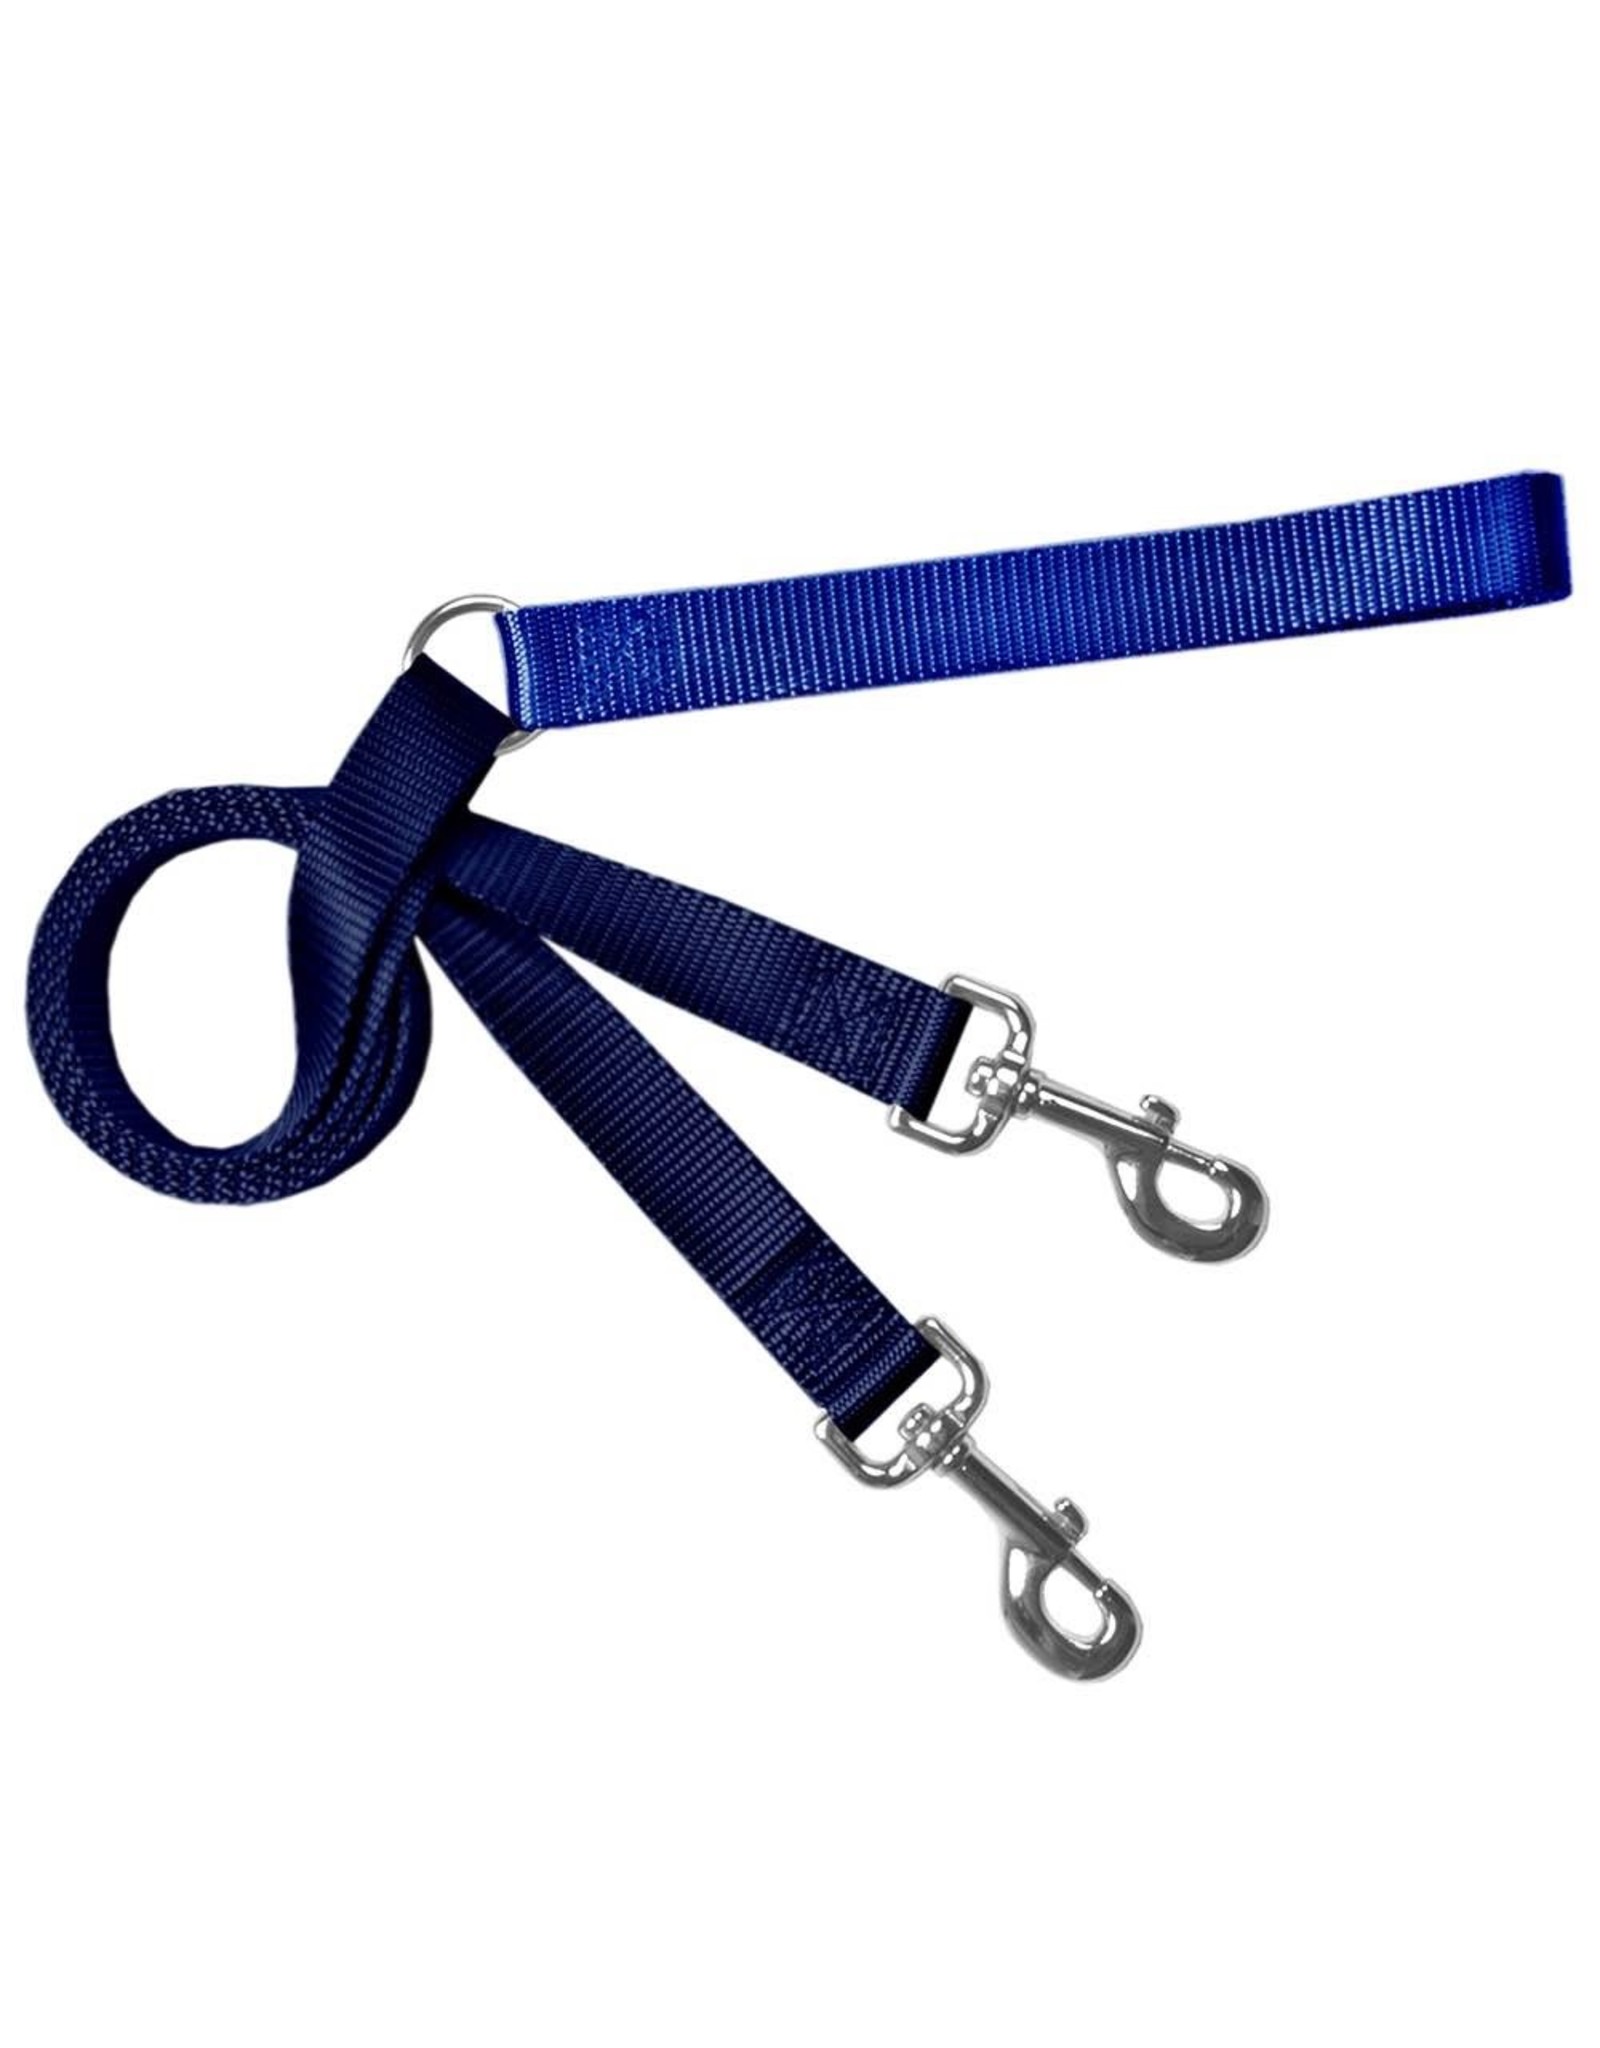 2 Hounds Design Double Connection Training Lead: Navy, 5/8"